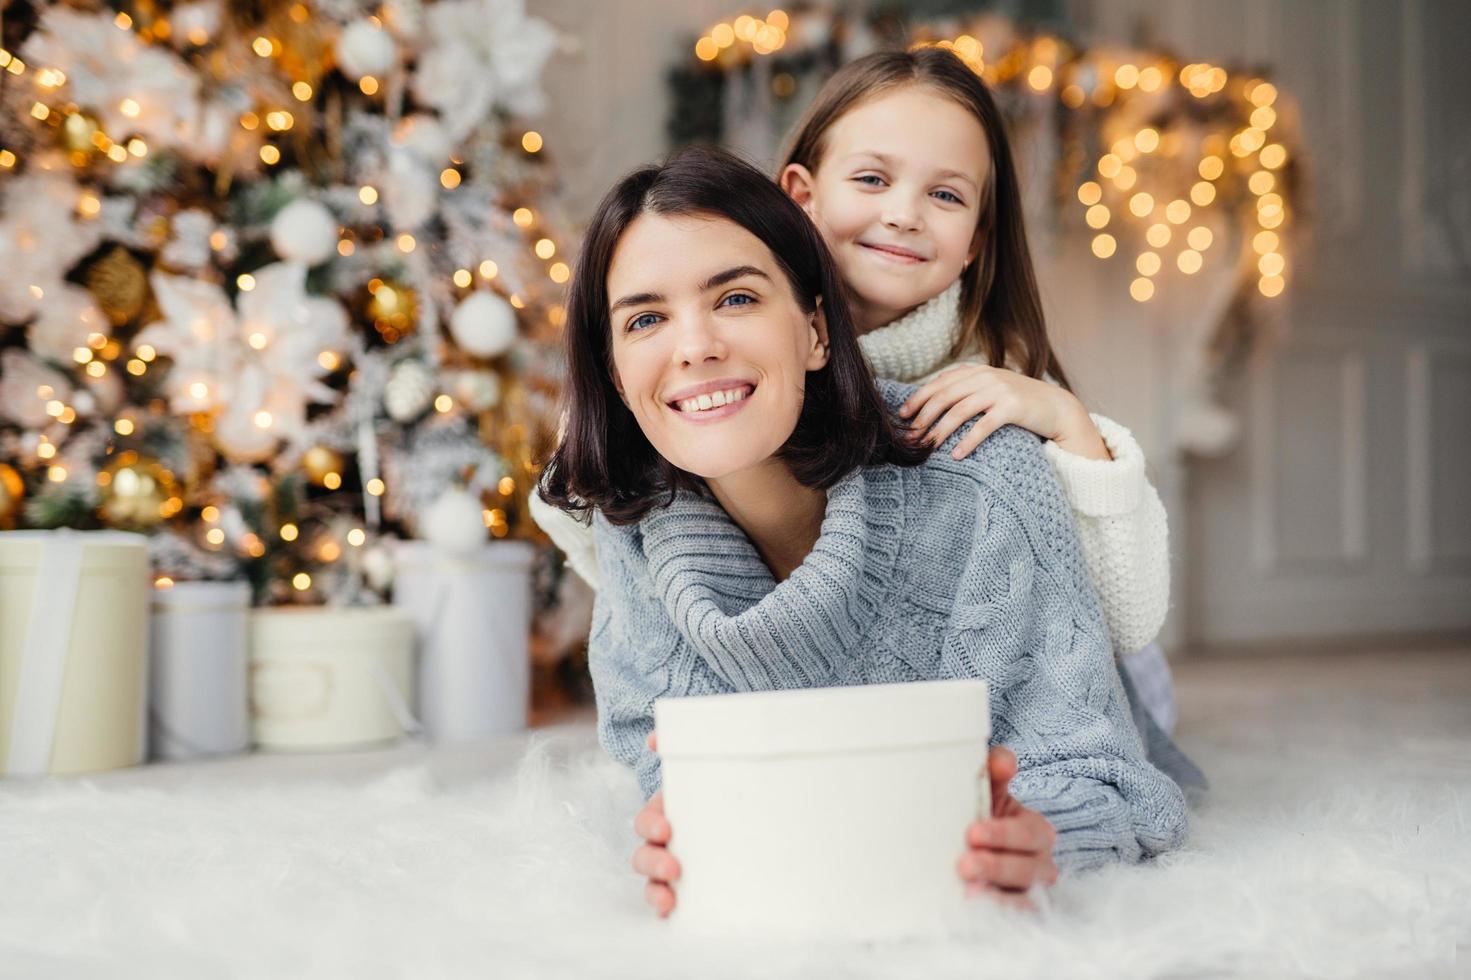 Indoor shot of mother and daughter have fun together, share presents, being in room decorated with garlands and Christmas tree, have joyful expressions, enjoy weekends and winter holidays photo